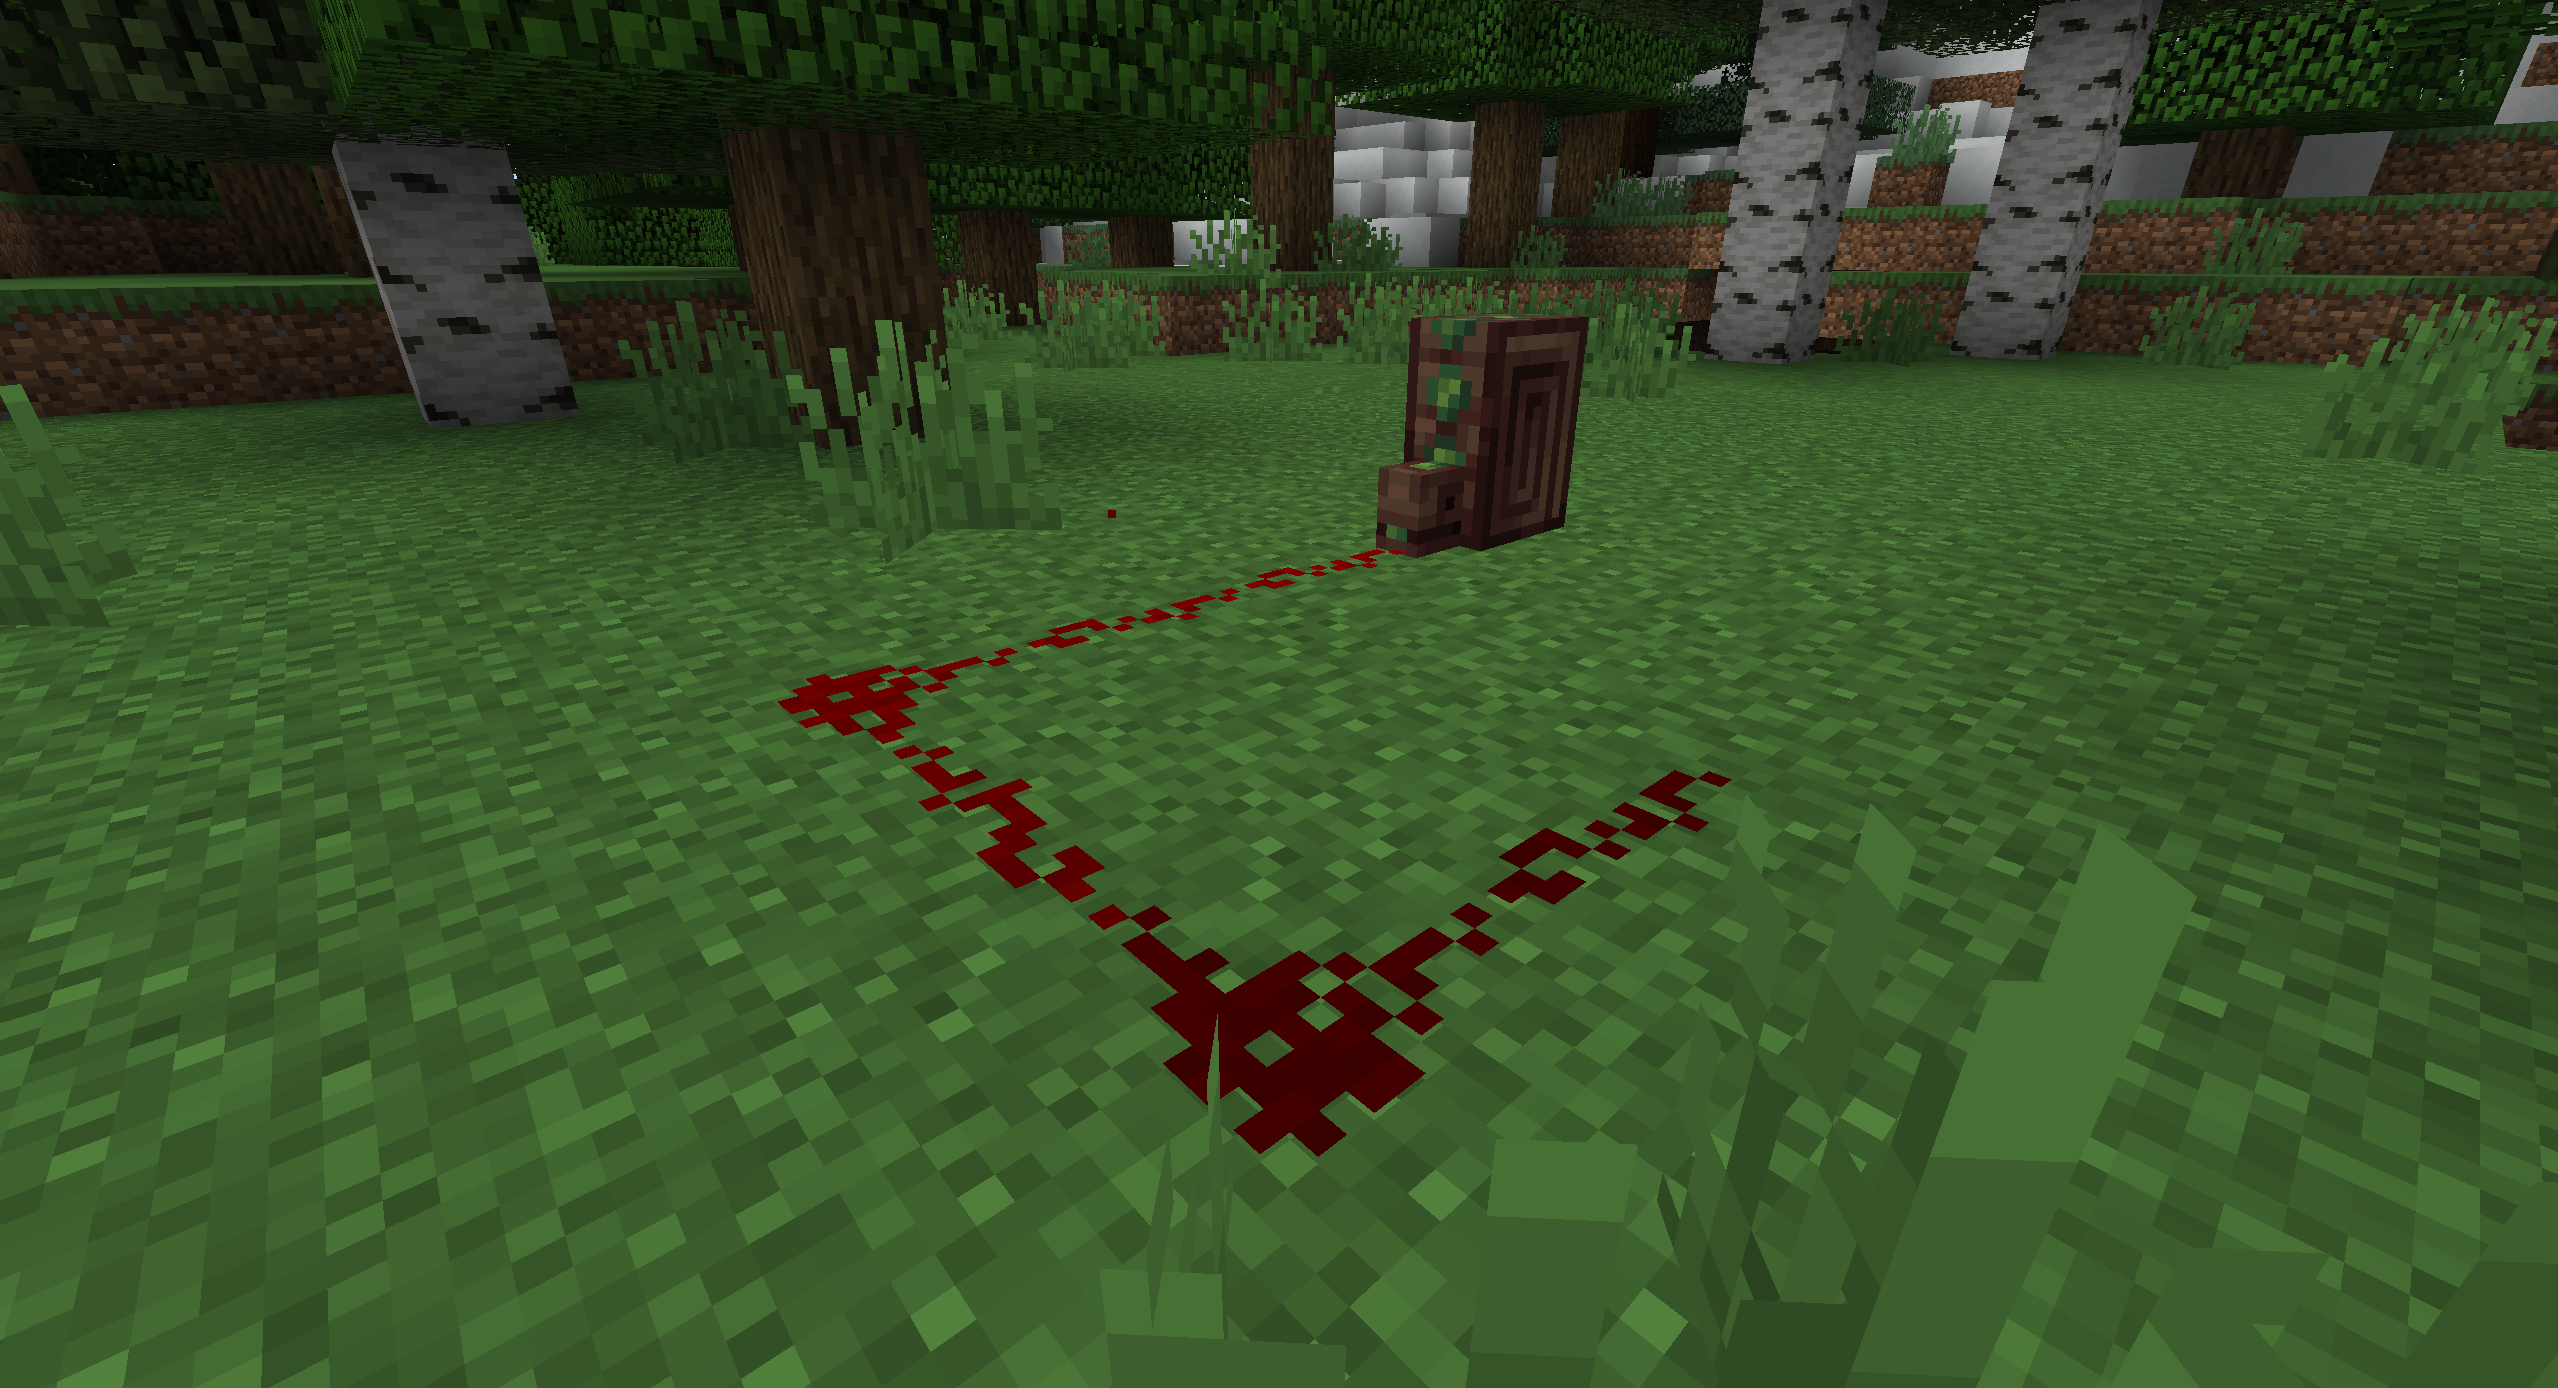 Thermolith outputting a redstone signal